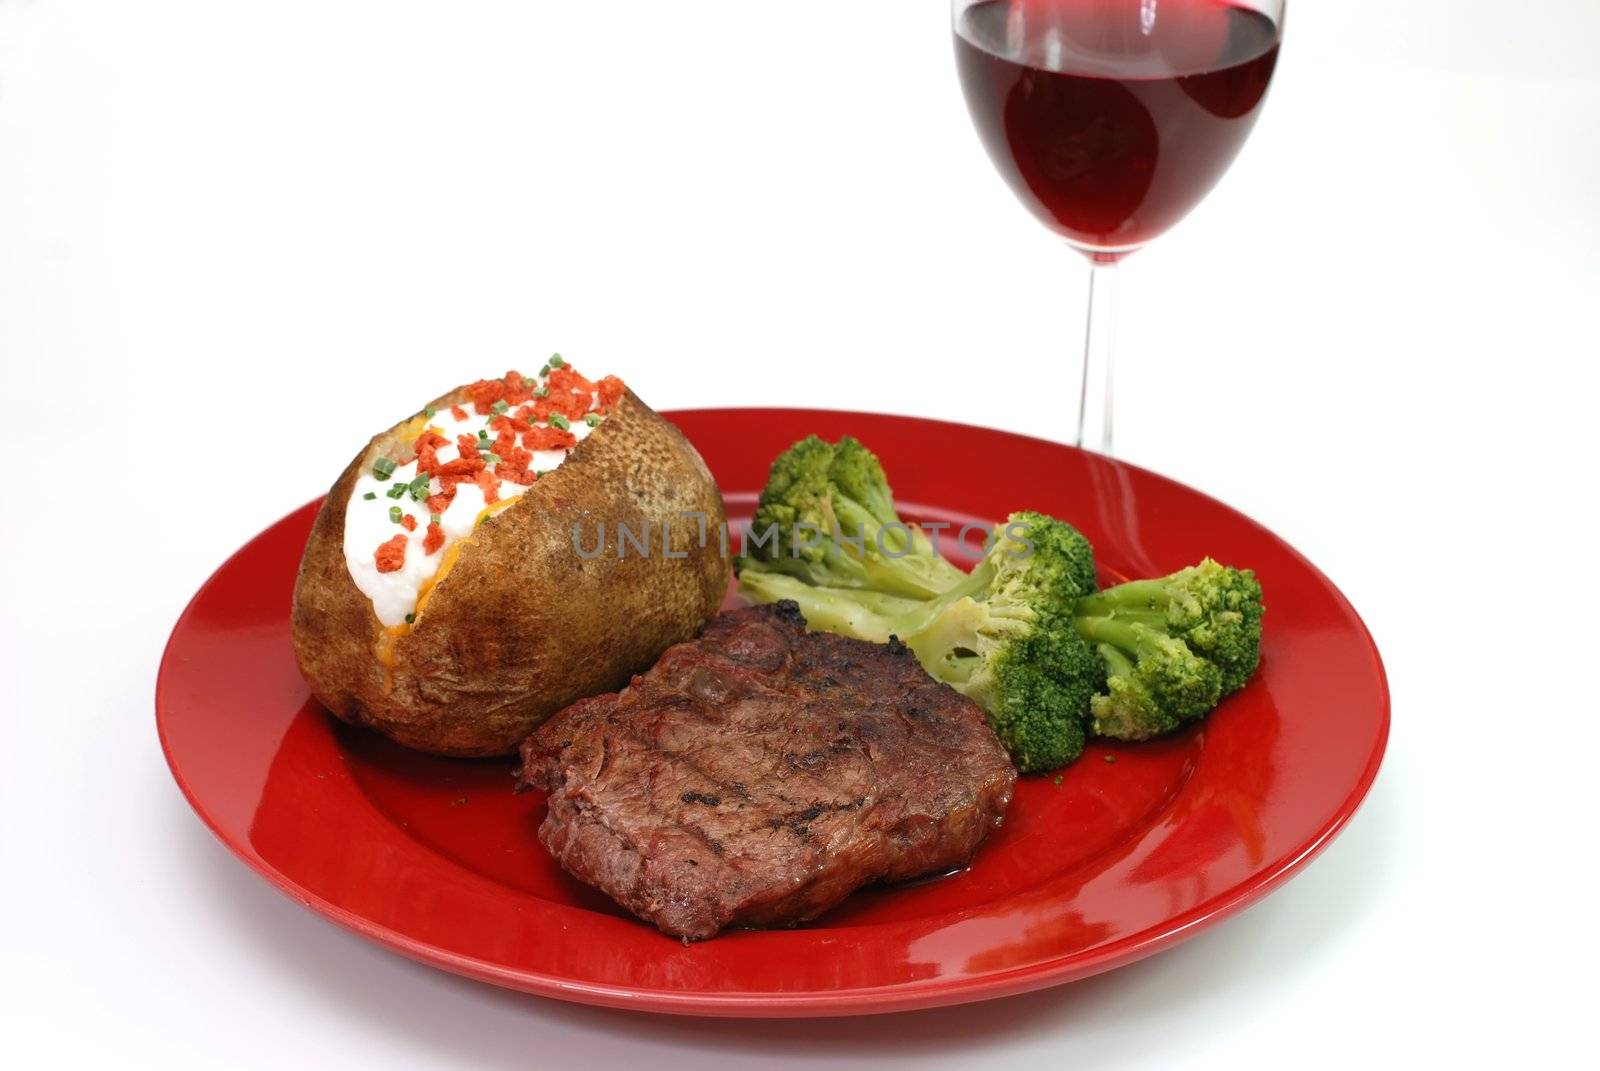 Grilled rib eye steak with baked potato and broccoli.  Isolated on white background.